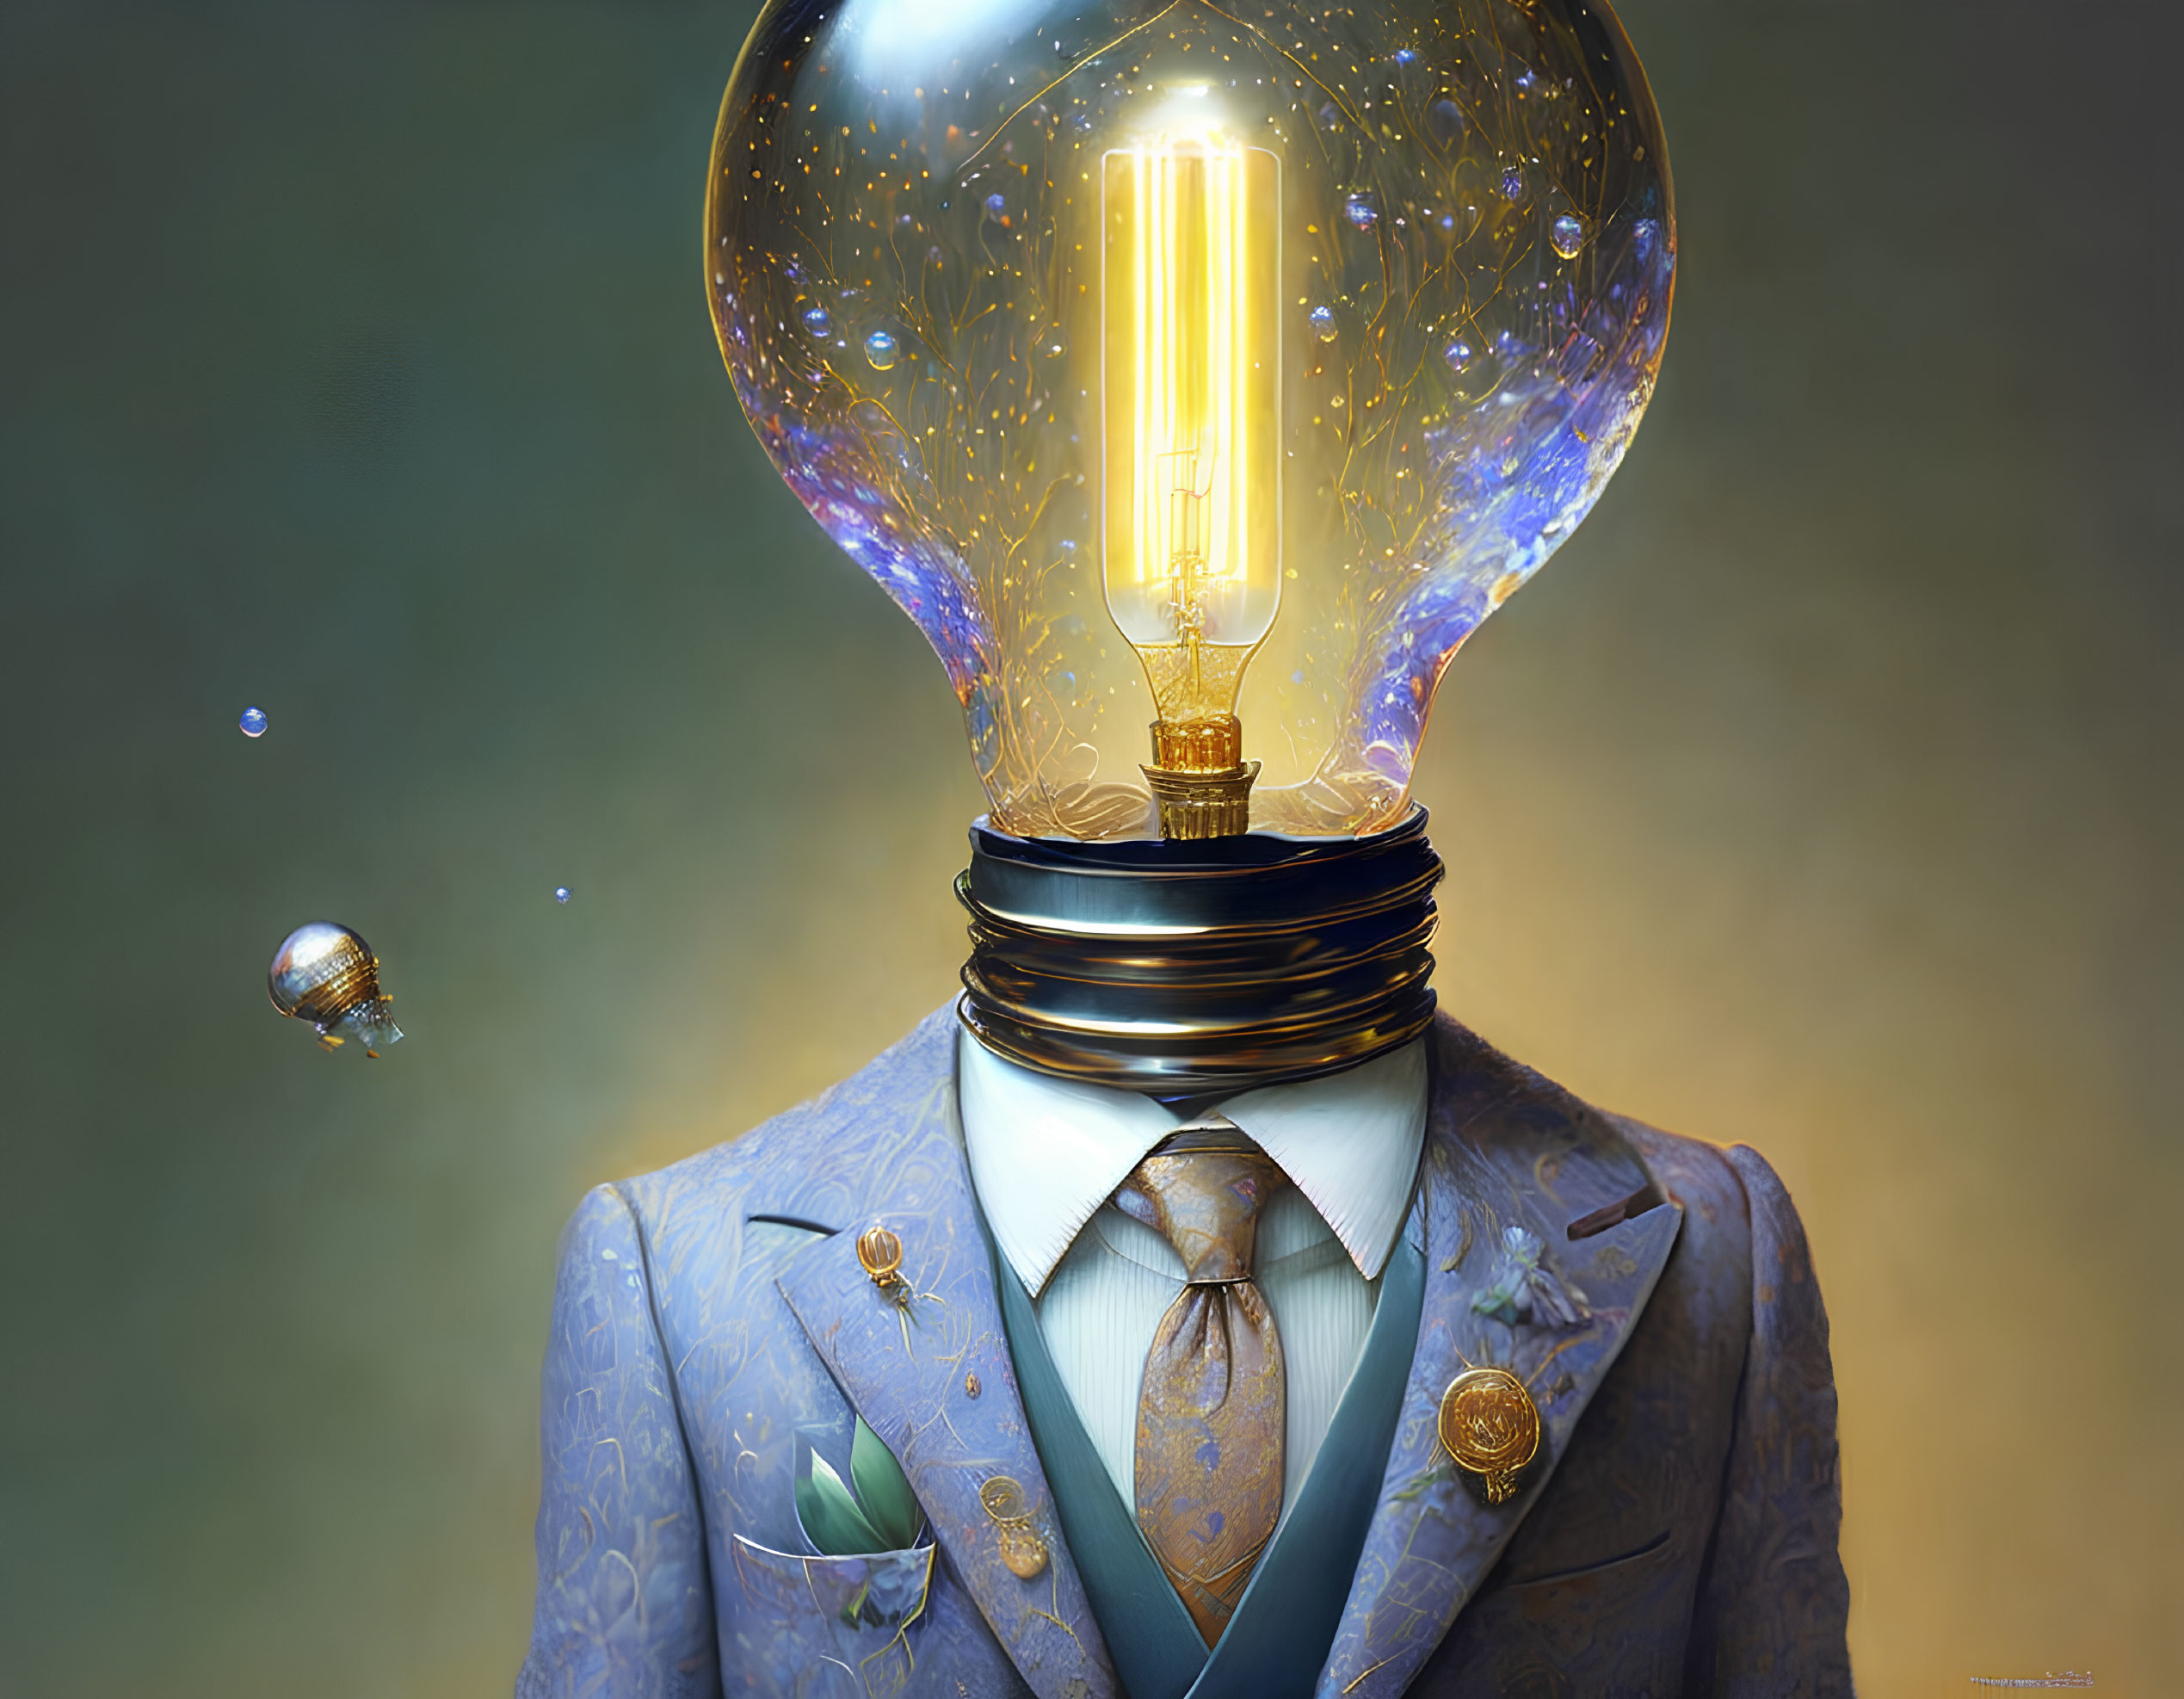 Surreal artwork featuring man's body with lightbulb head and floating galaxies